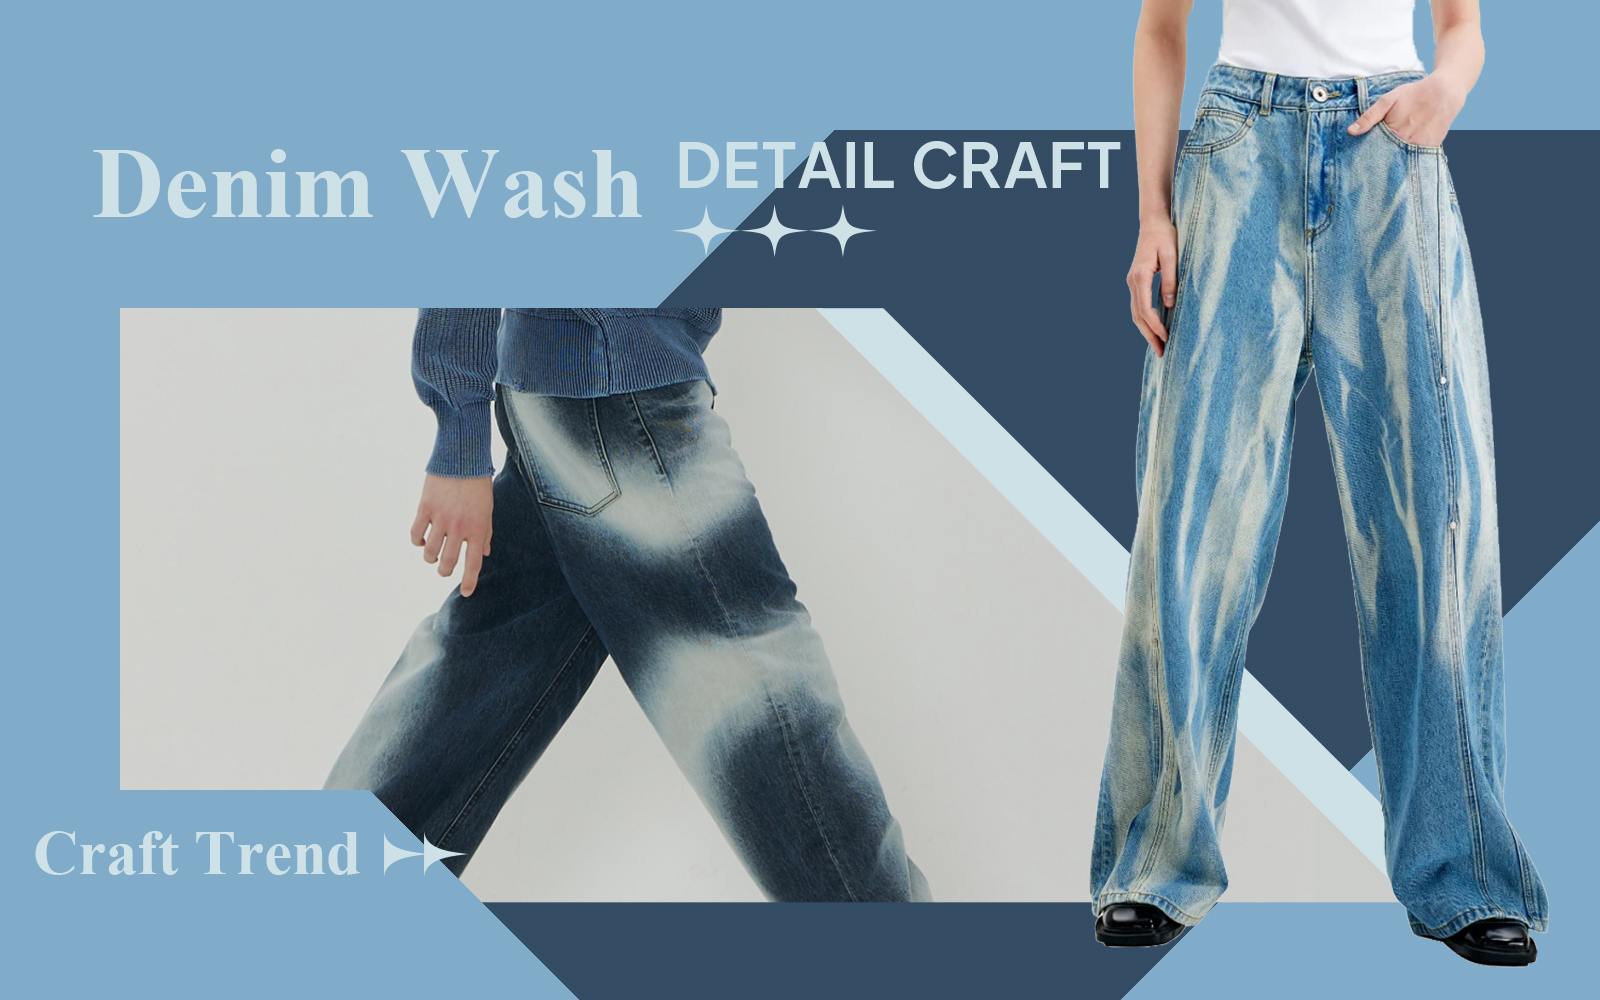 Fading & Bleaching -- The Craft Trend for Denim Wash